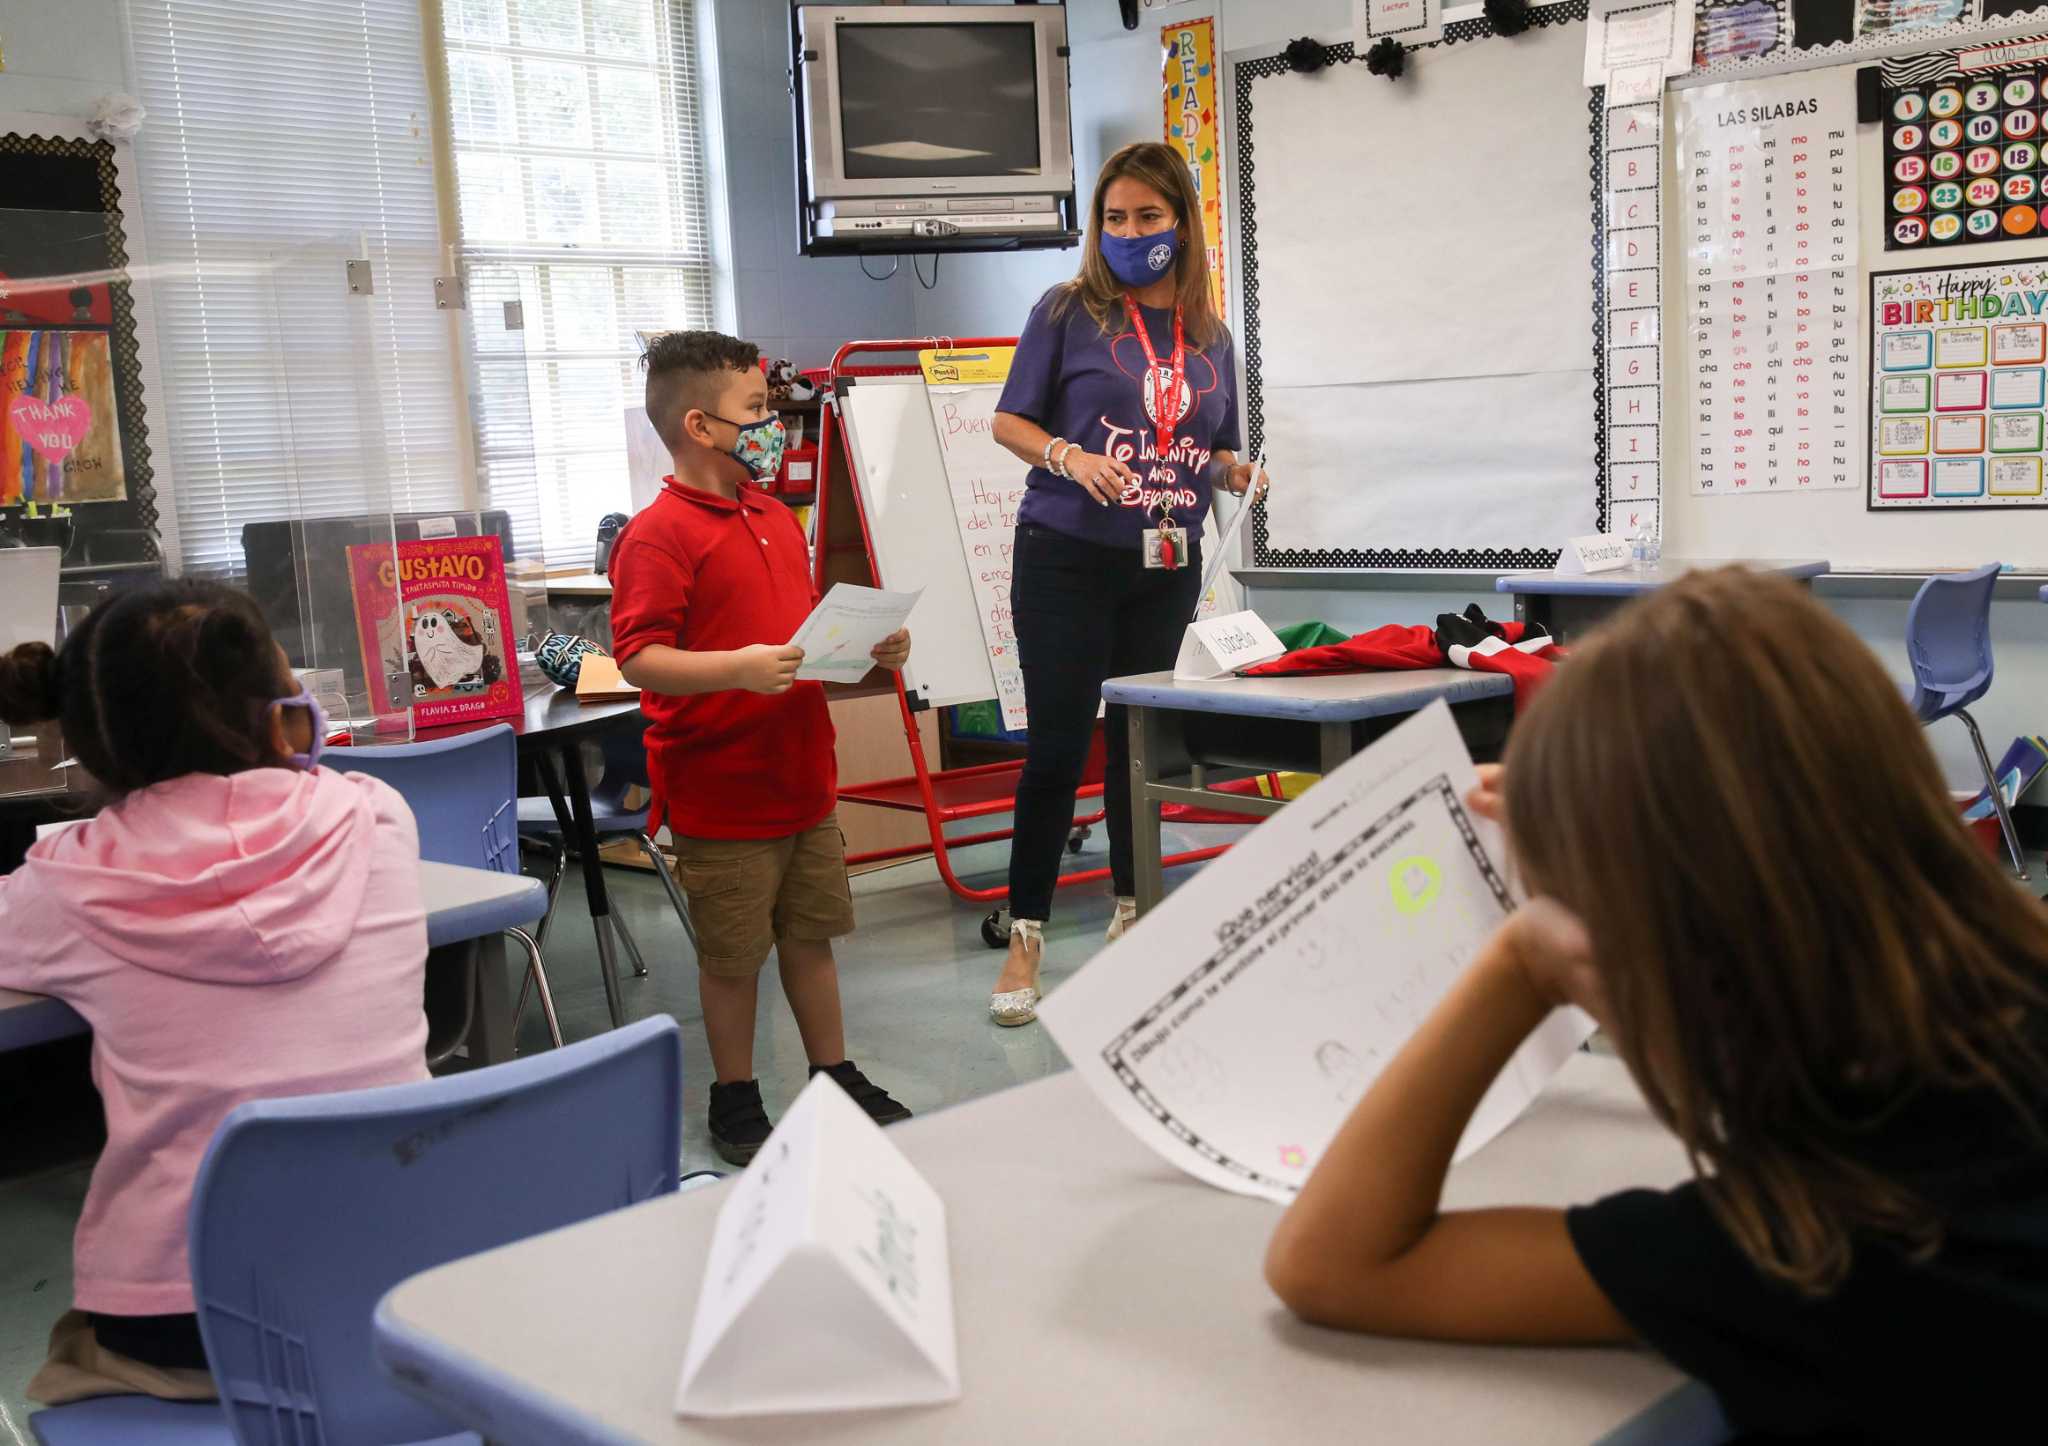 Commentary: Retaining teachers will take more than pay boost